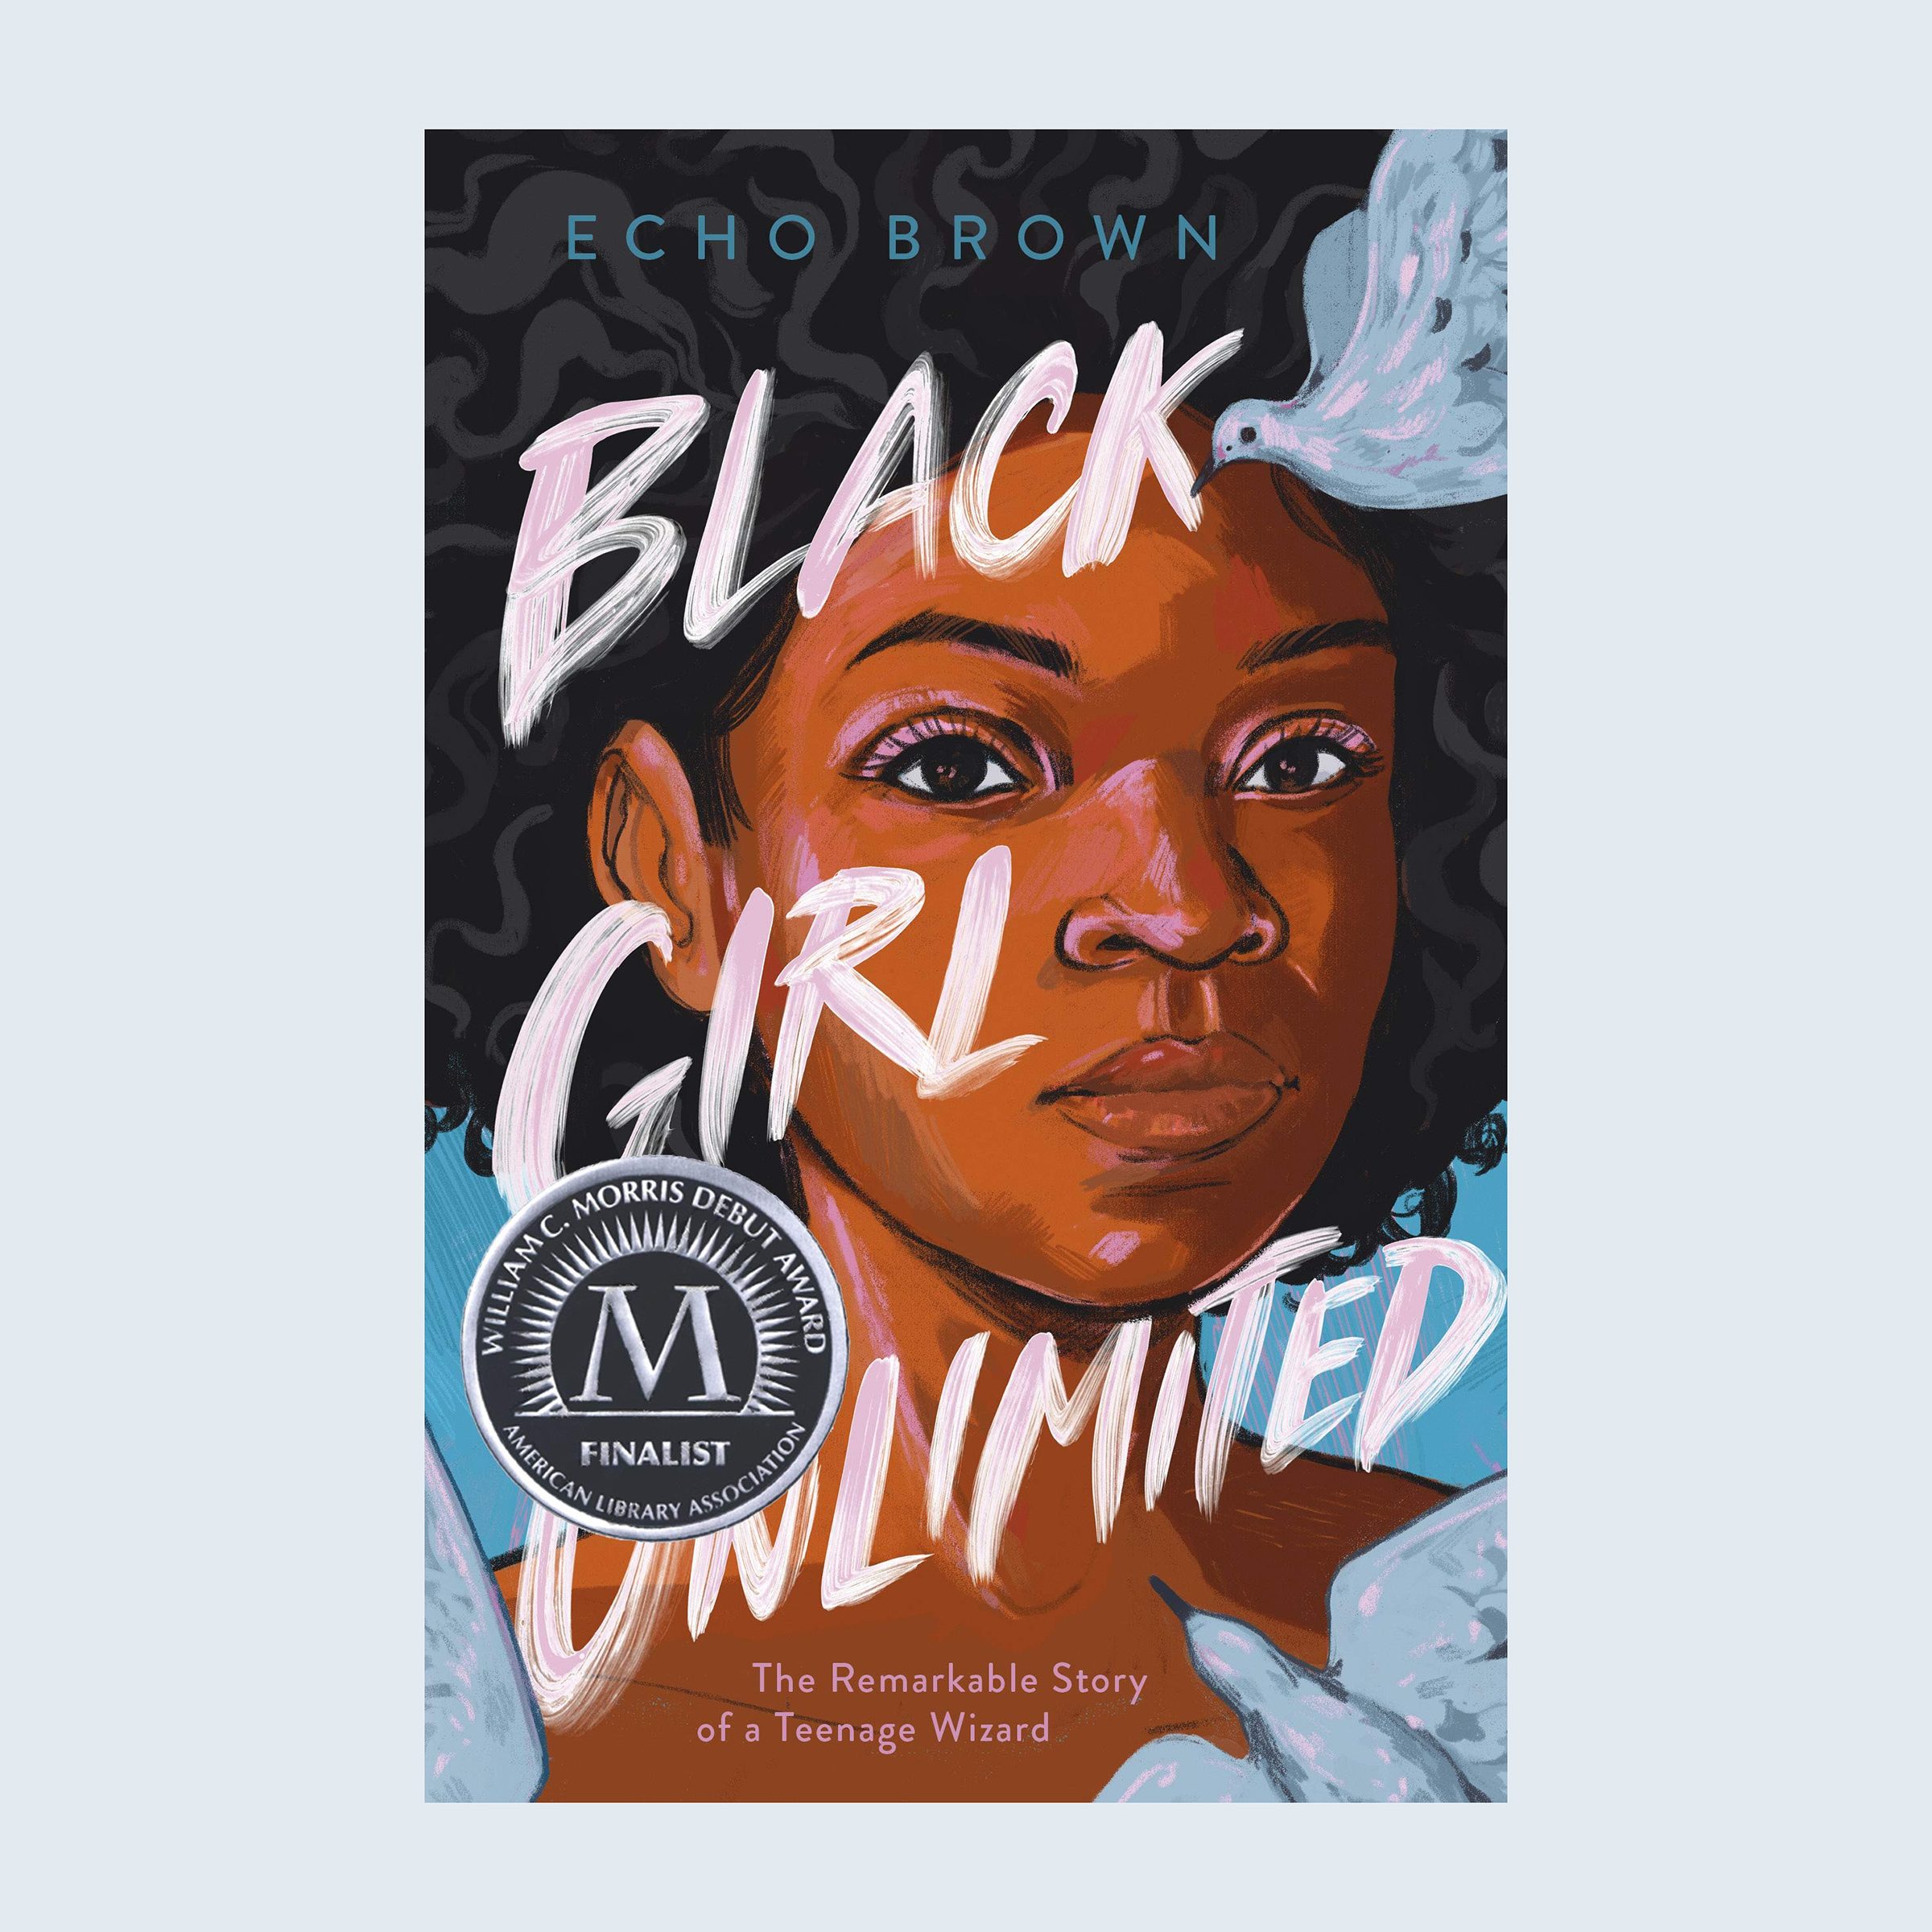 Black Girl Unlimited: The Remarkable Story of a Teenage Wizard by Echo Brown